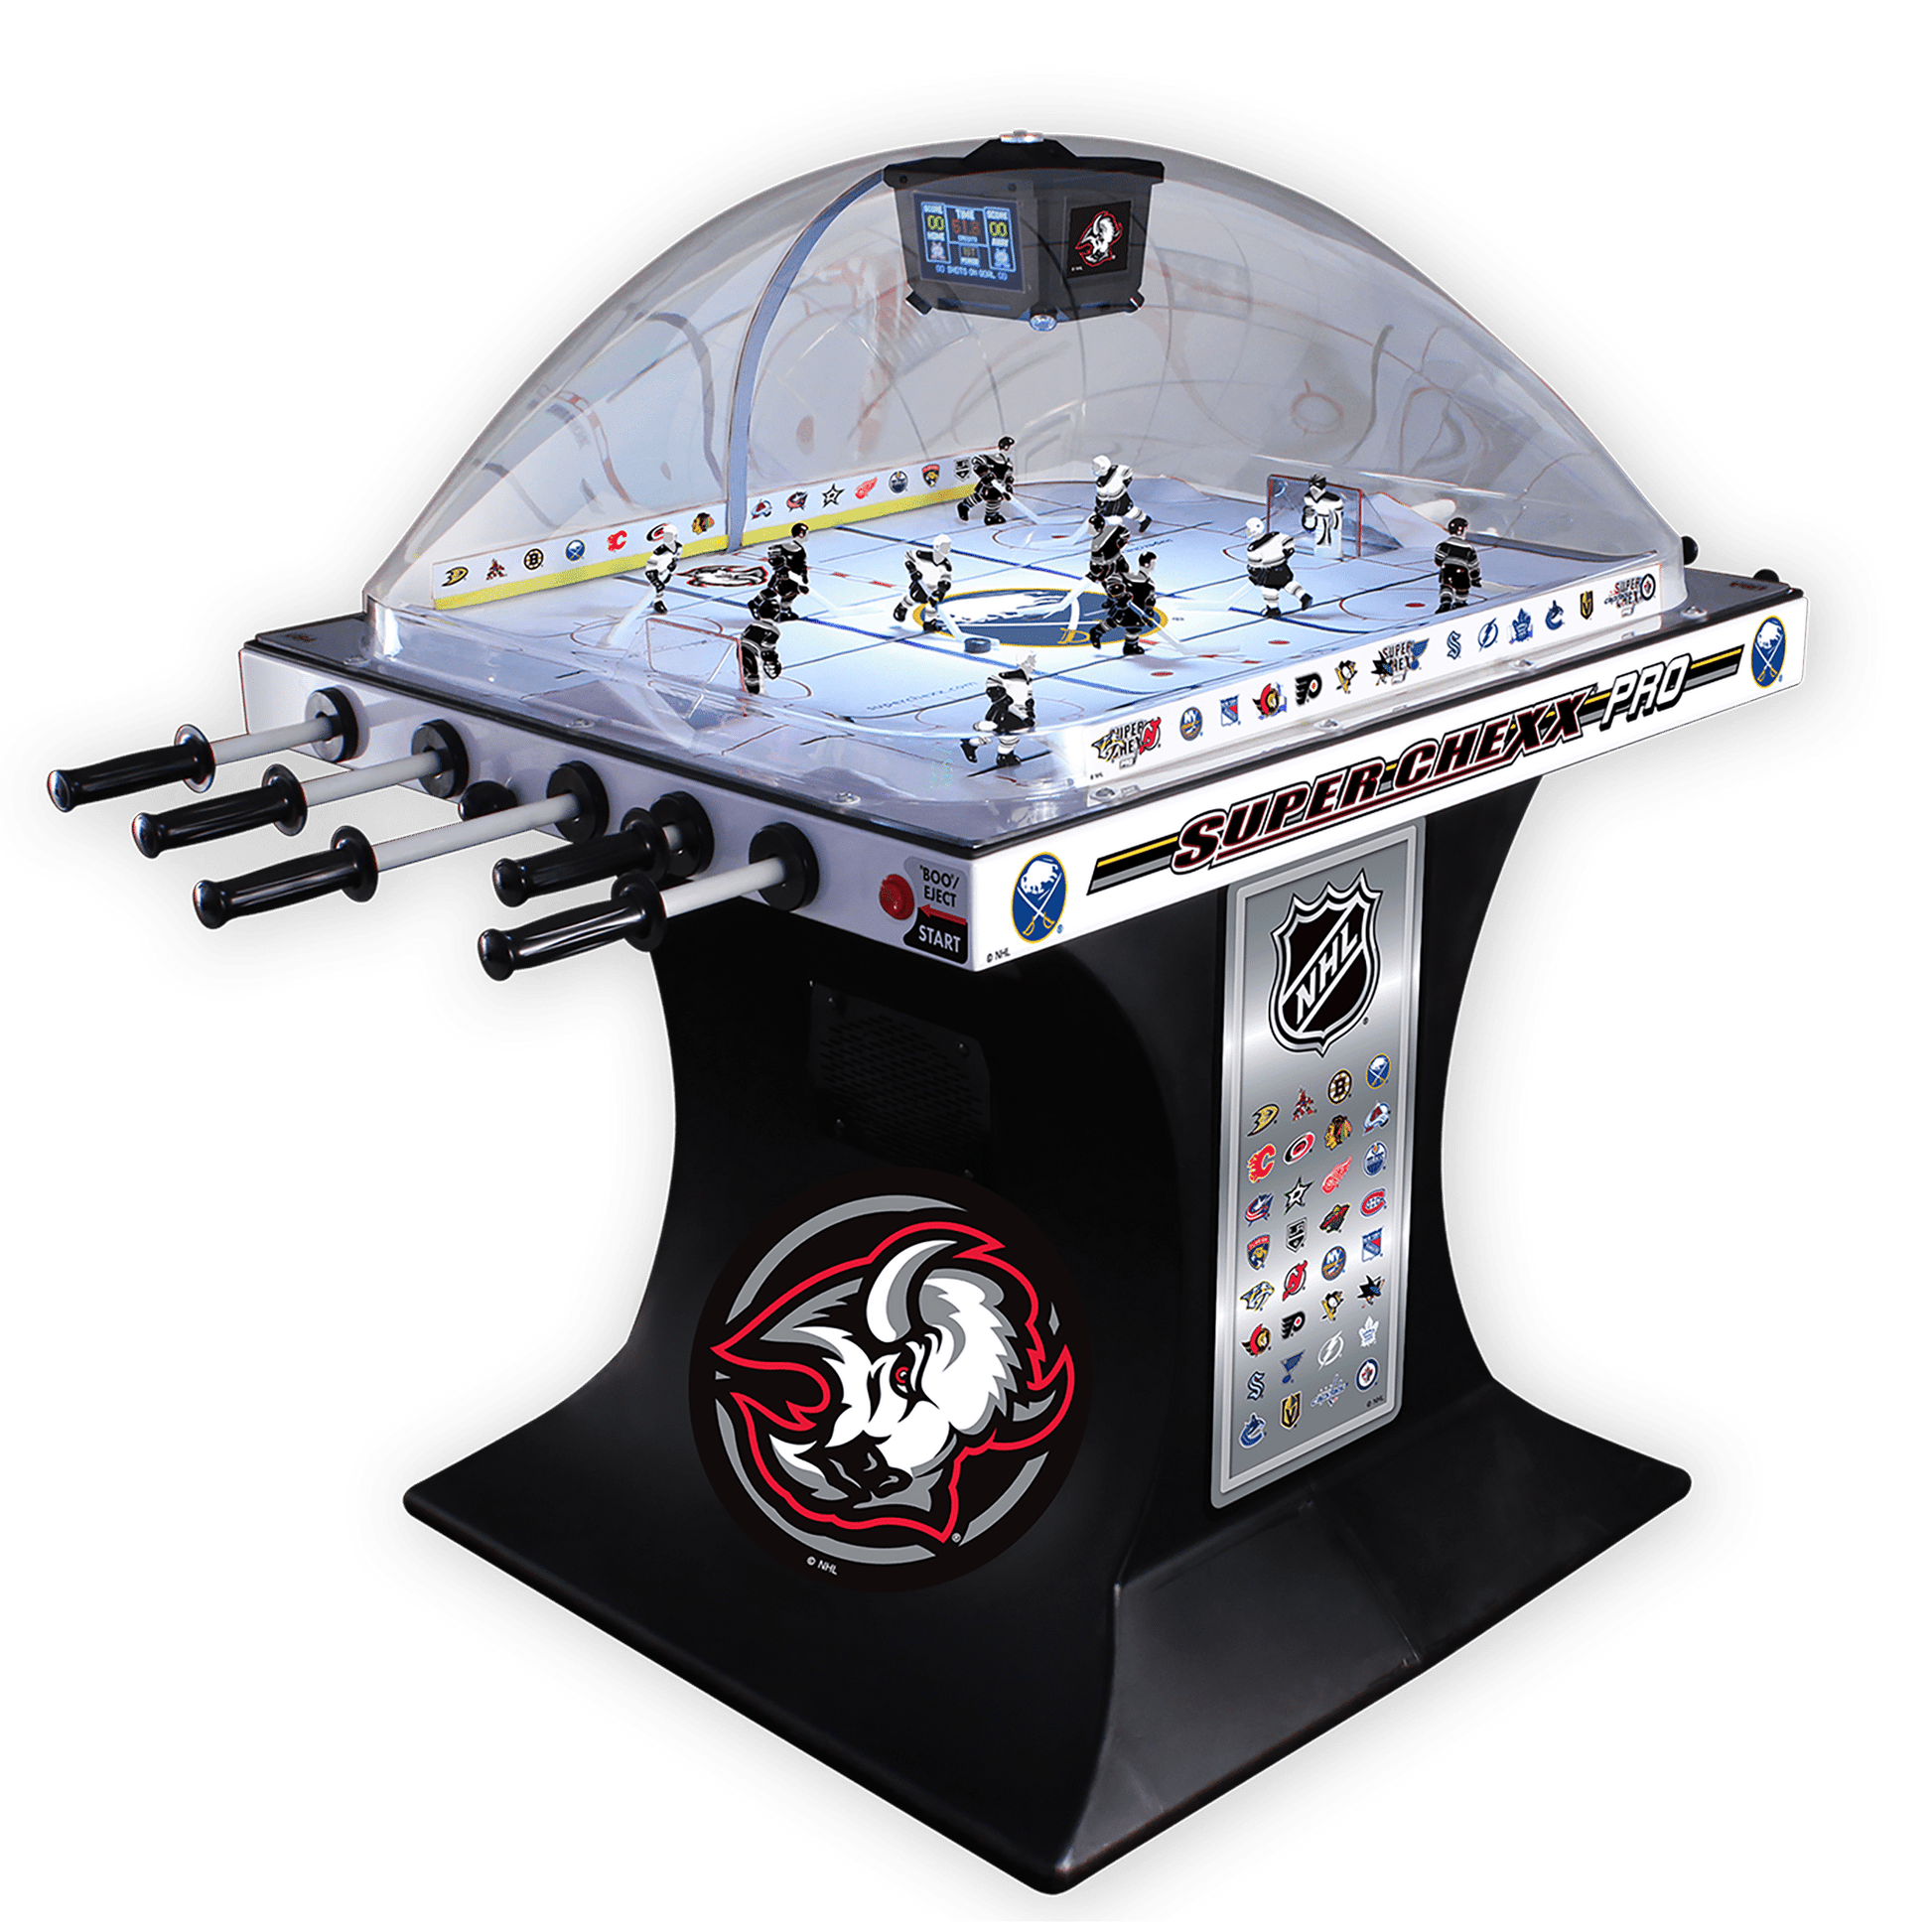 Buffalo Sabres (Goat Head) Special Edition Super Chexx Pro Bubble Hockey  Innovative Concepts in Entertainment   